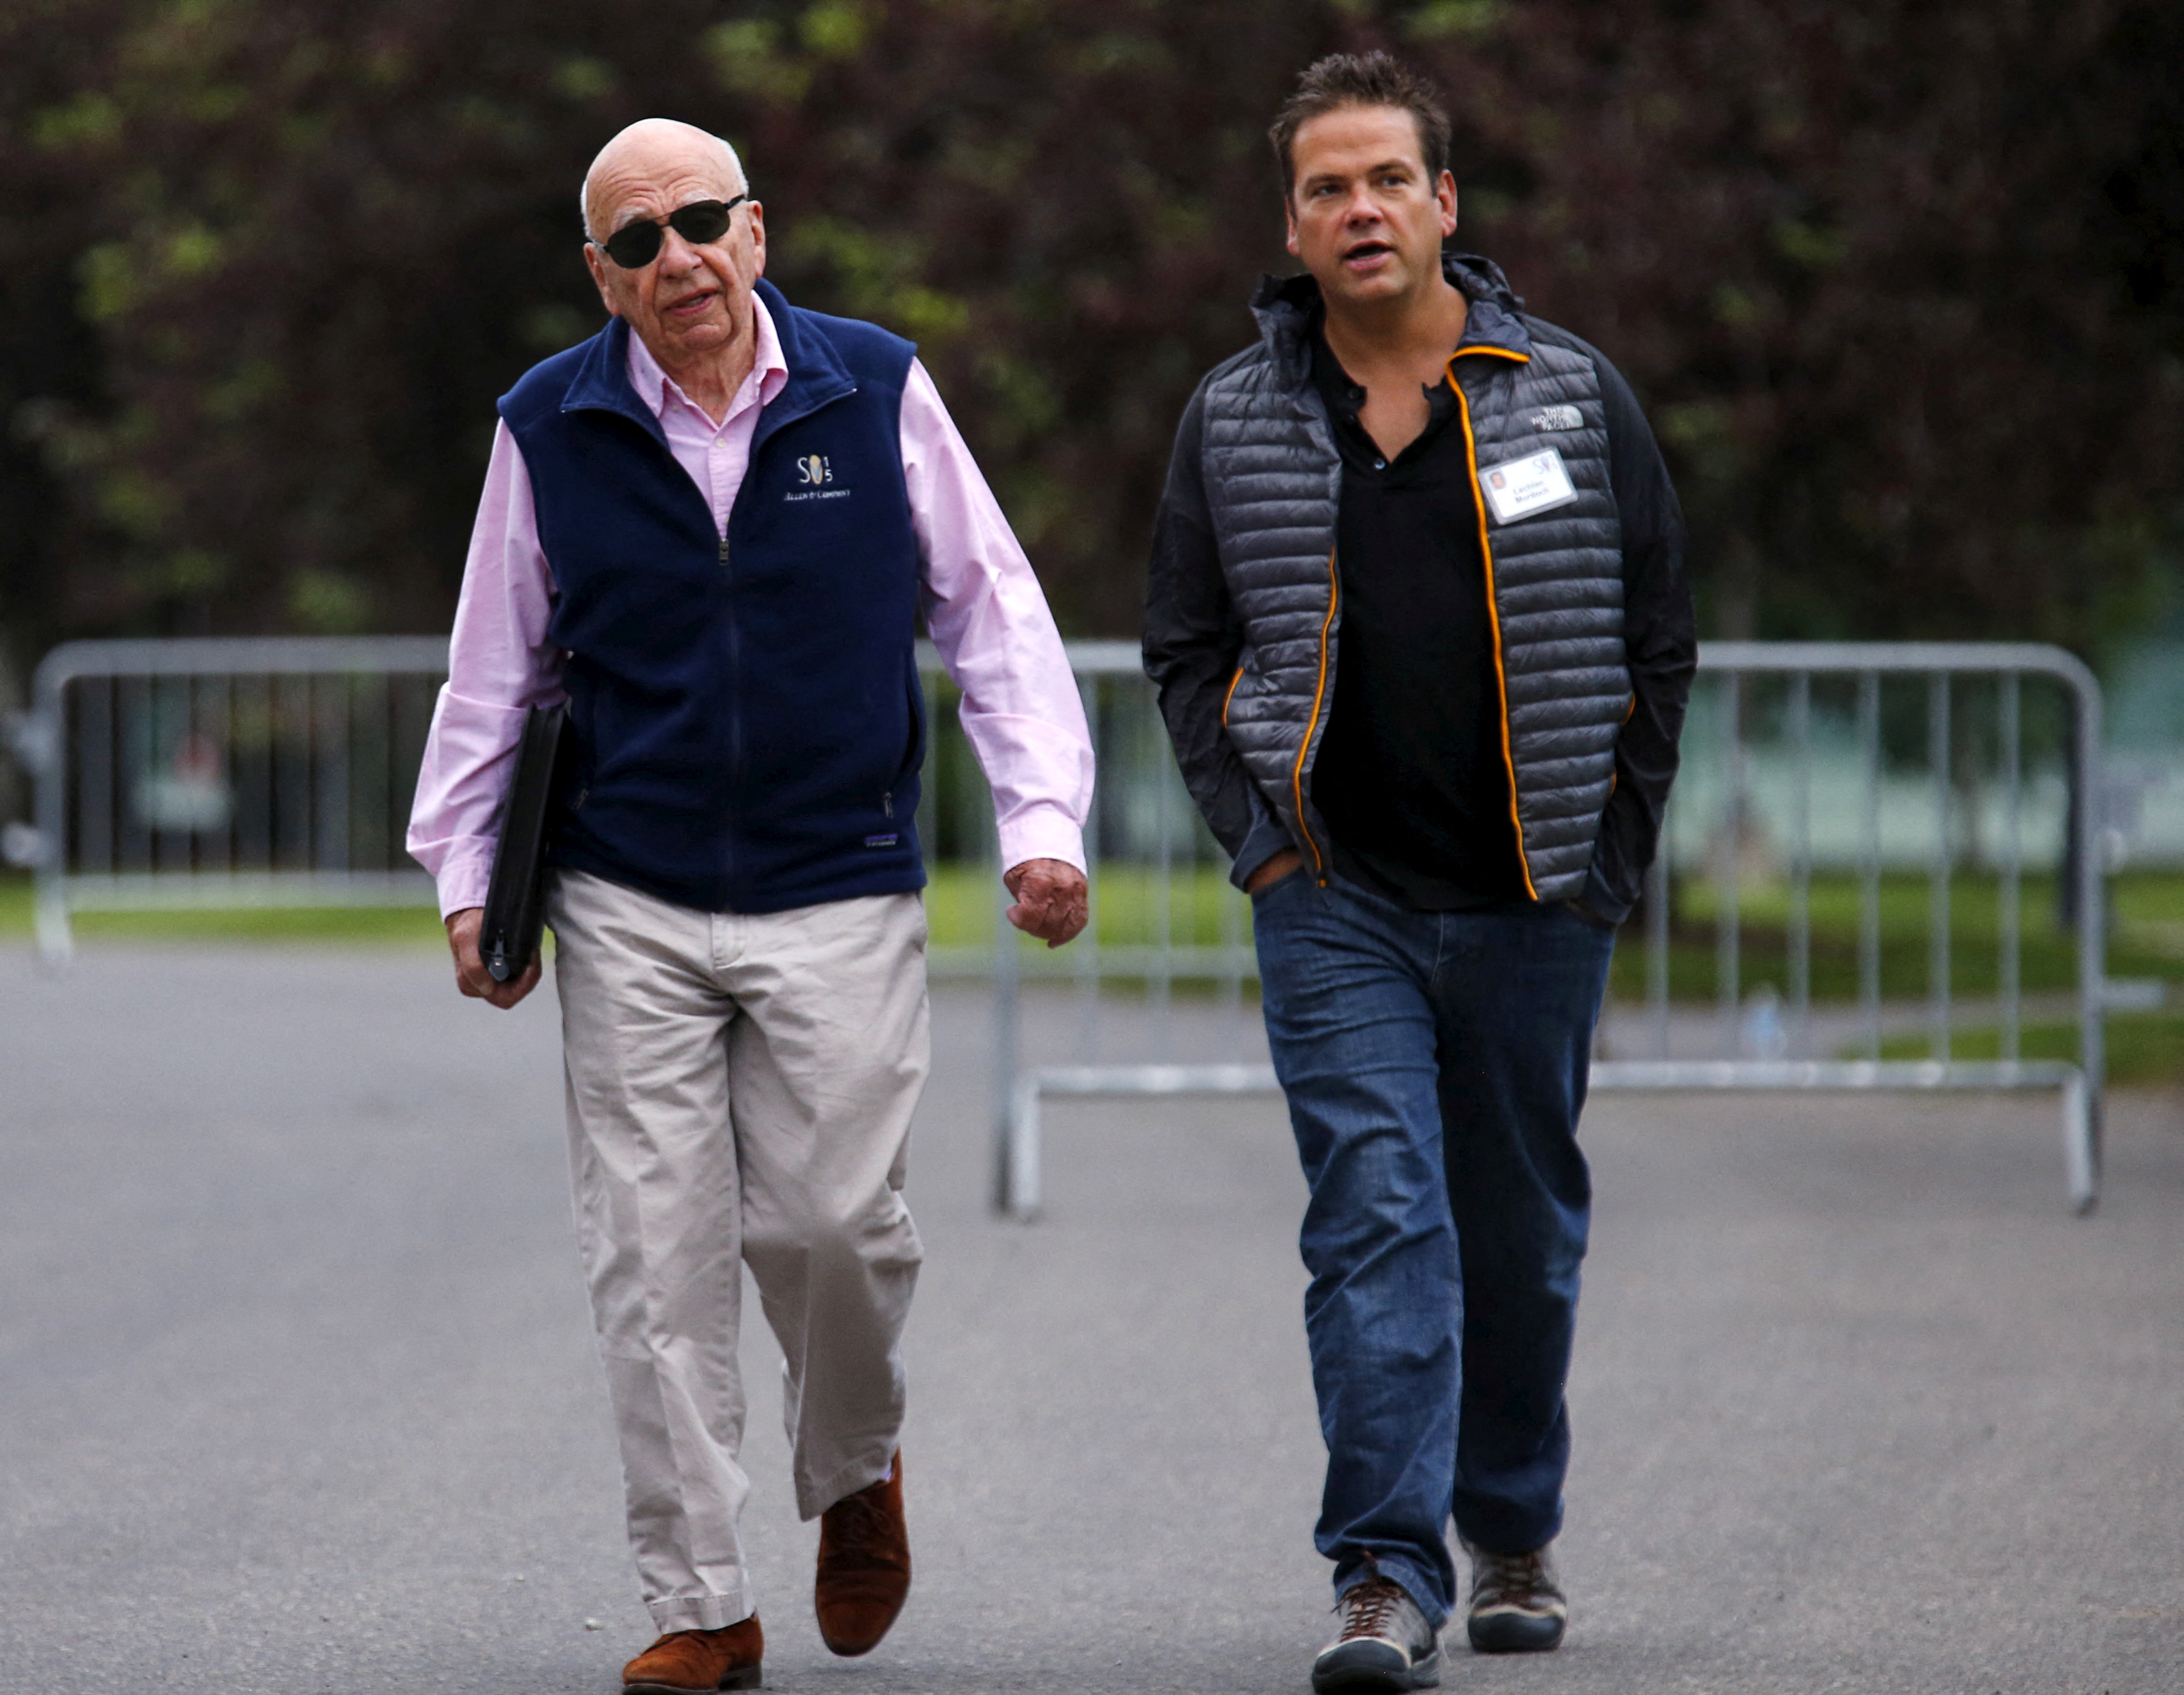 21st Century Fox Executive Co-Chairmen Rupert and Lachlan Murdoch attend the first day of the annual Allen and Co. media conference in Sun Valley